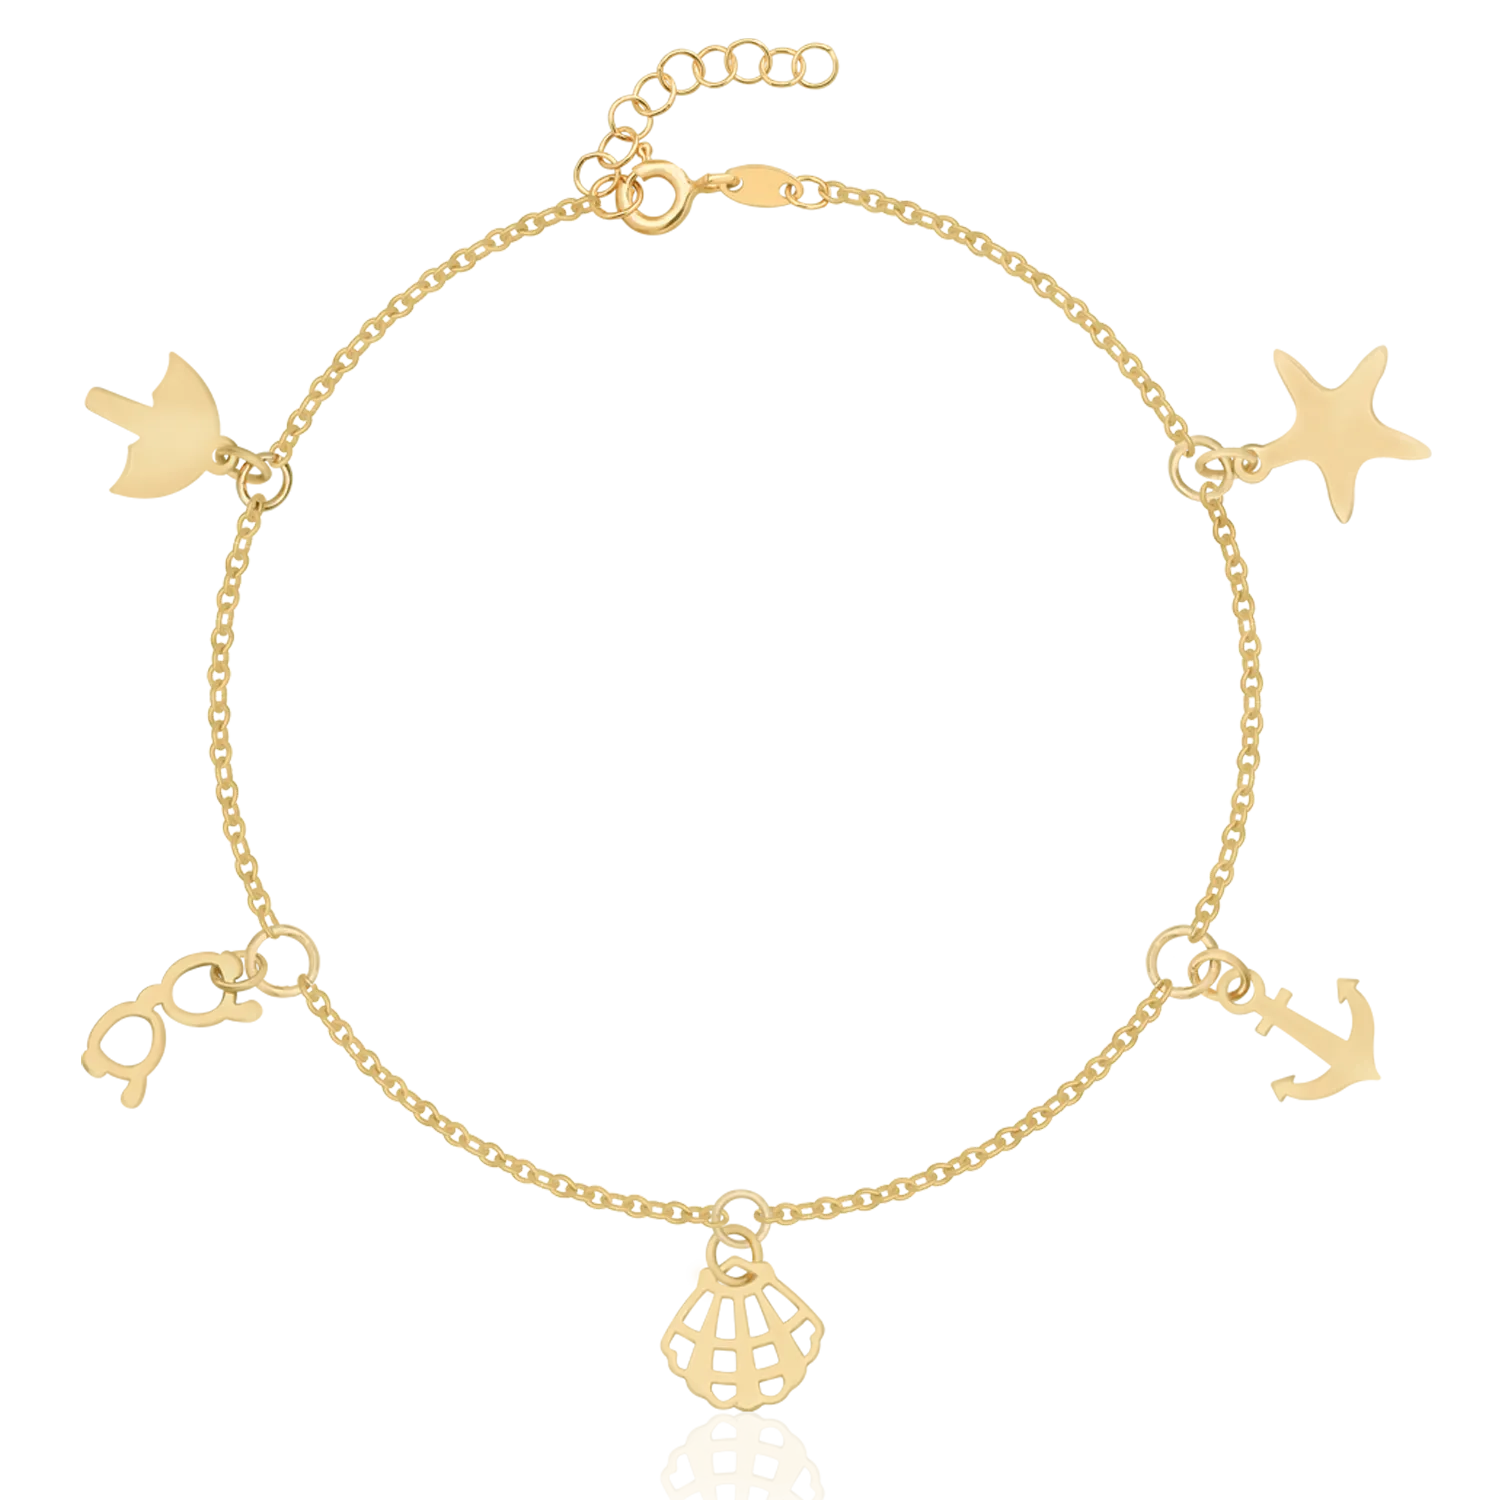 14K yellow gold ankle bracelet with charms